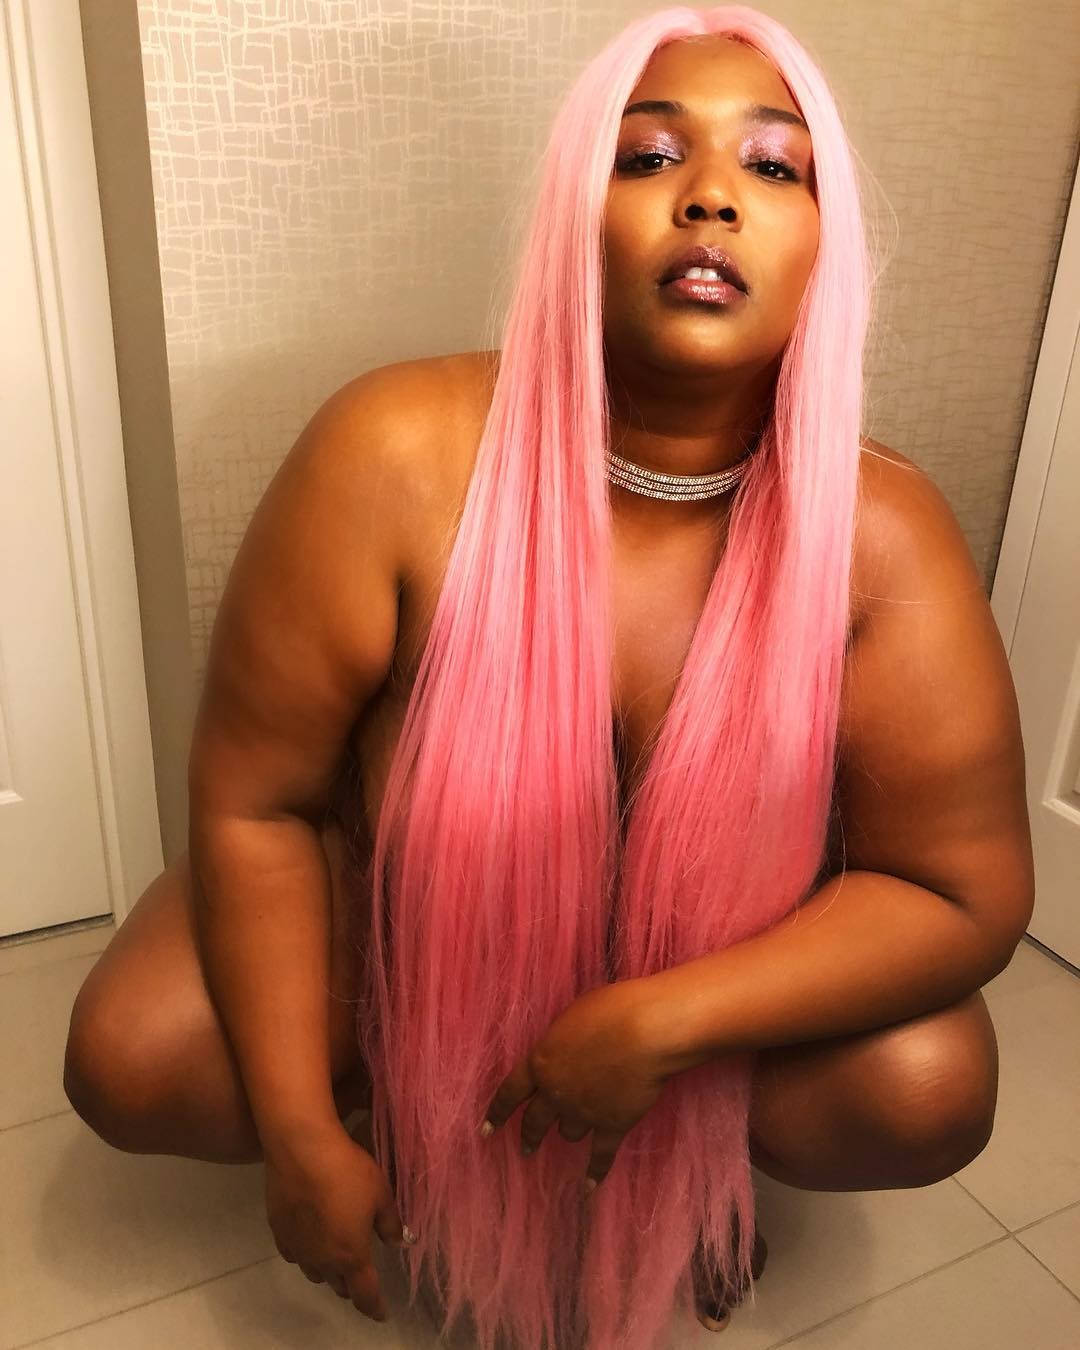 Lizzo Nude And Sexy Photos Fat Ass and Boobs (15)